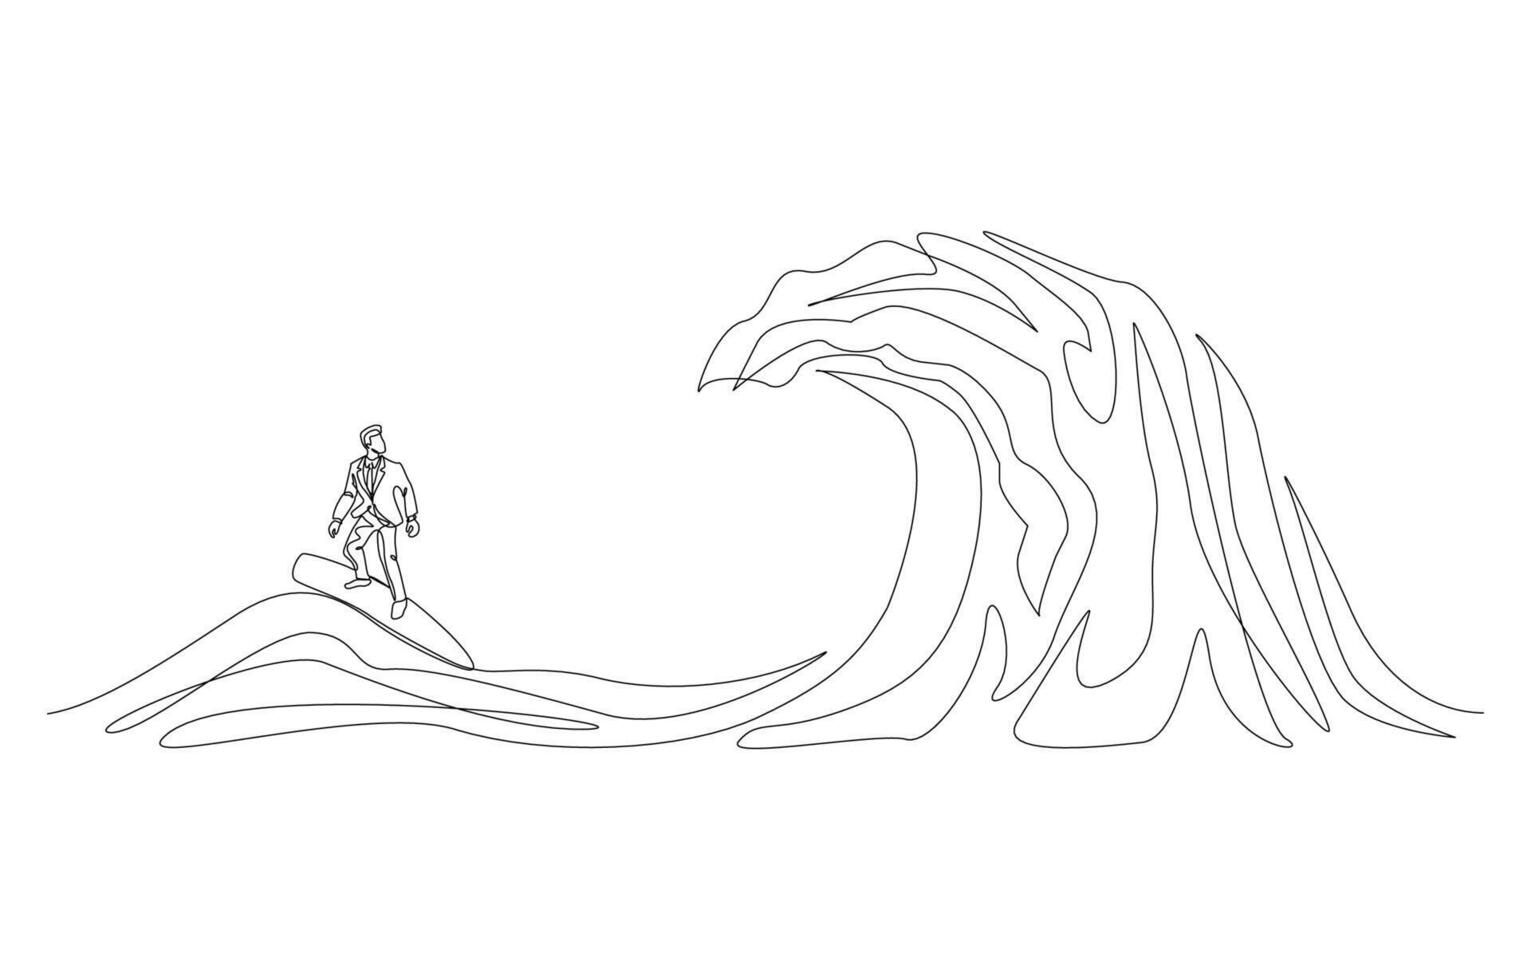 Continuous one line drawing of businessman surfing big oceanic wave, business challenge or overcoming difficulty at work concept, single line art. vector